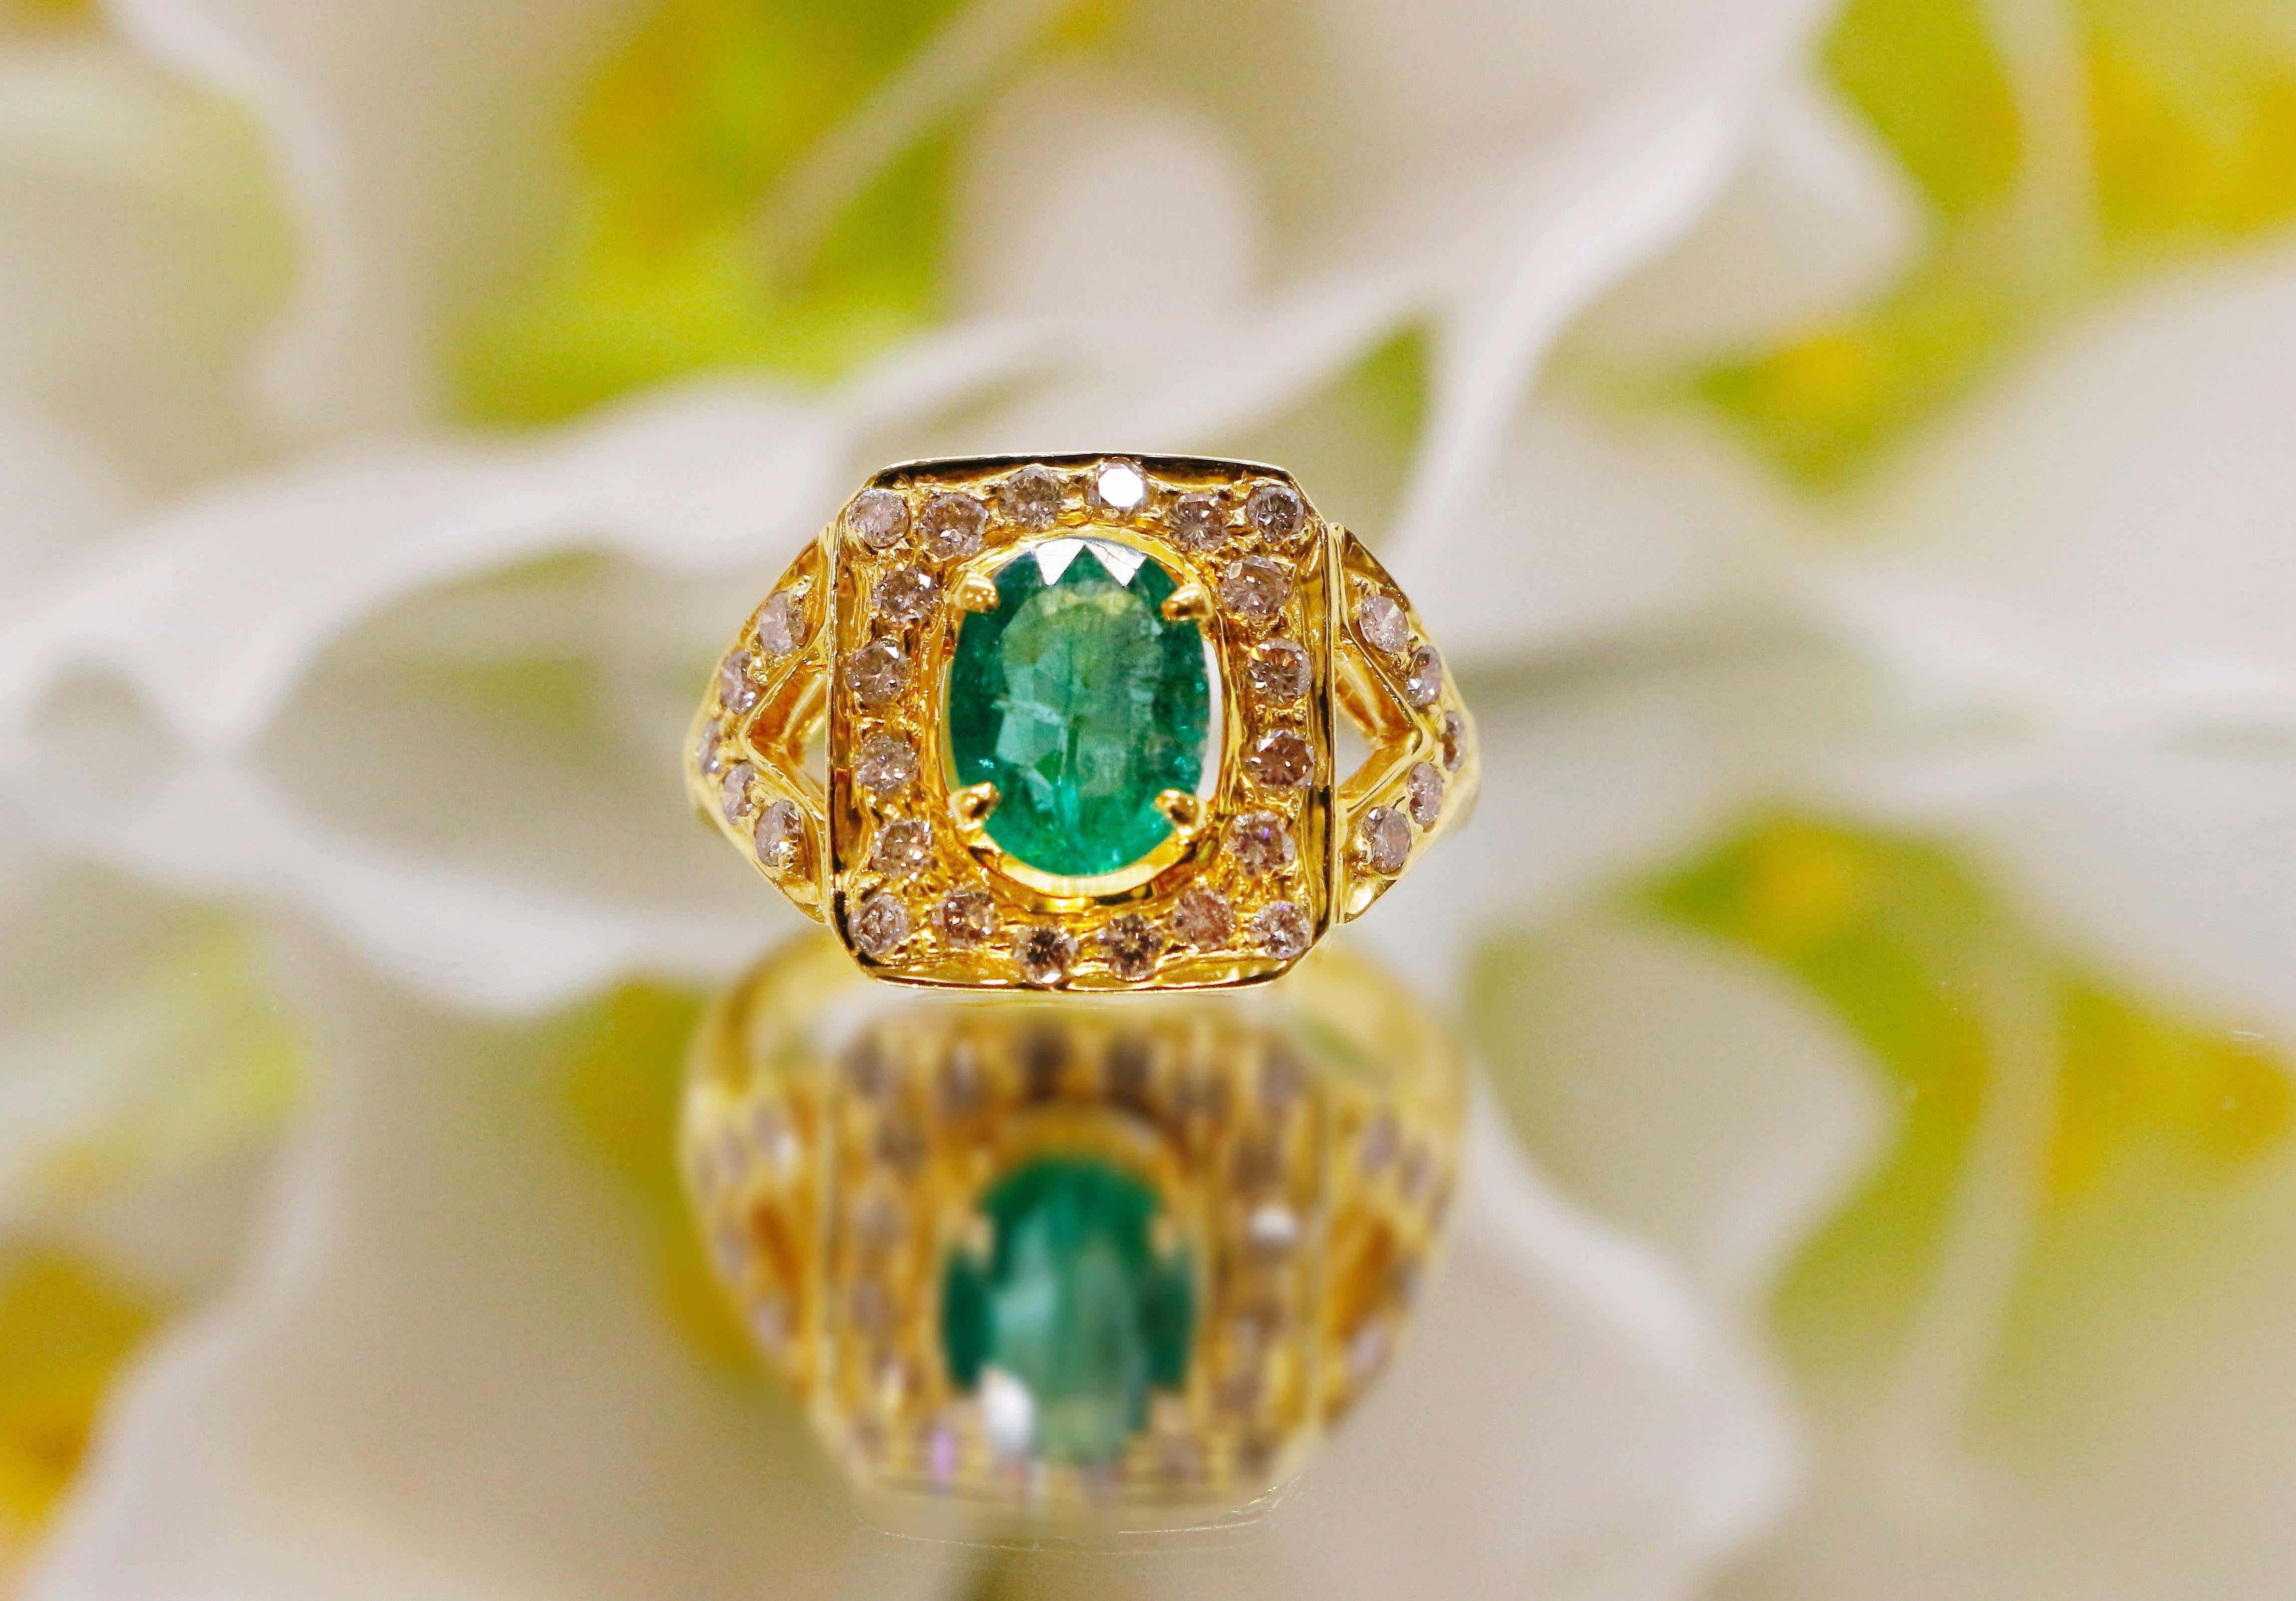 ◆Detail description◆

◆Solid 18kt Gold(shown in picture)

◆Natural Emerald Weight: 1.15 CT

◆Diamond Carat: 0.30 CT

◆Diamond Shape: Round mixed

◆Total Weight: 5.2 Gram